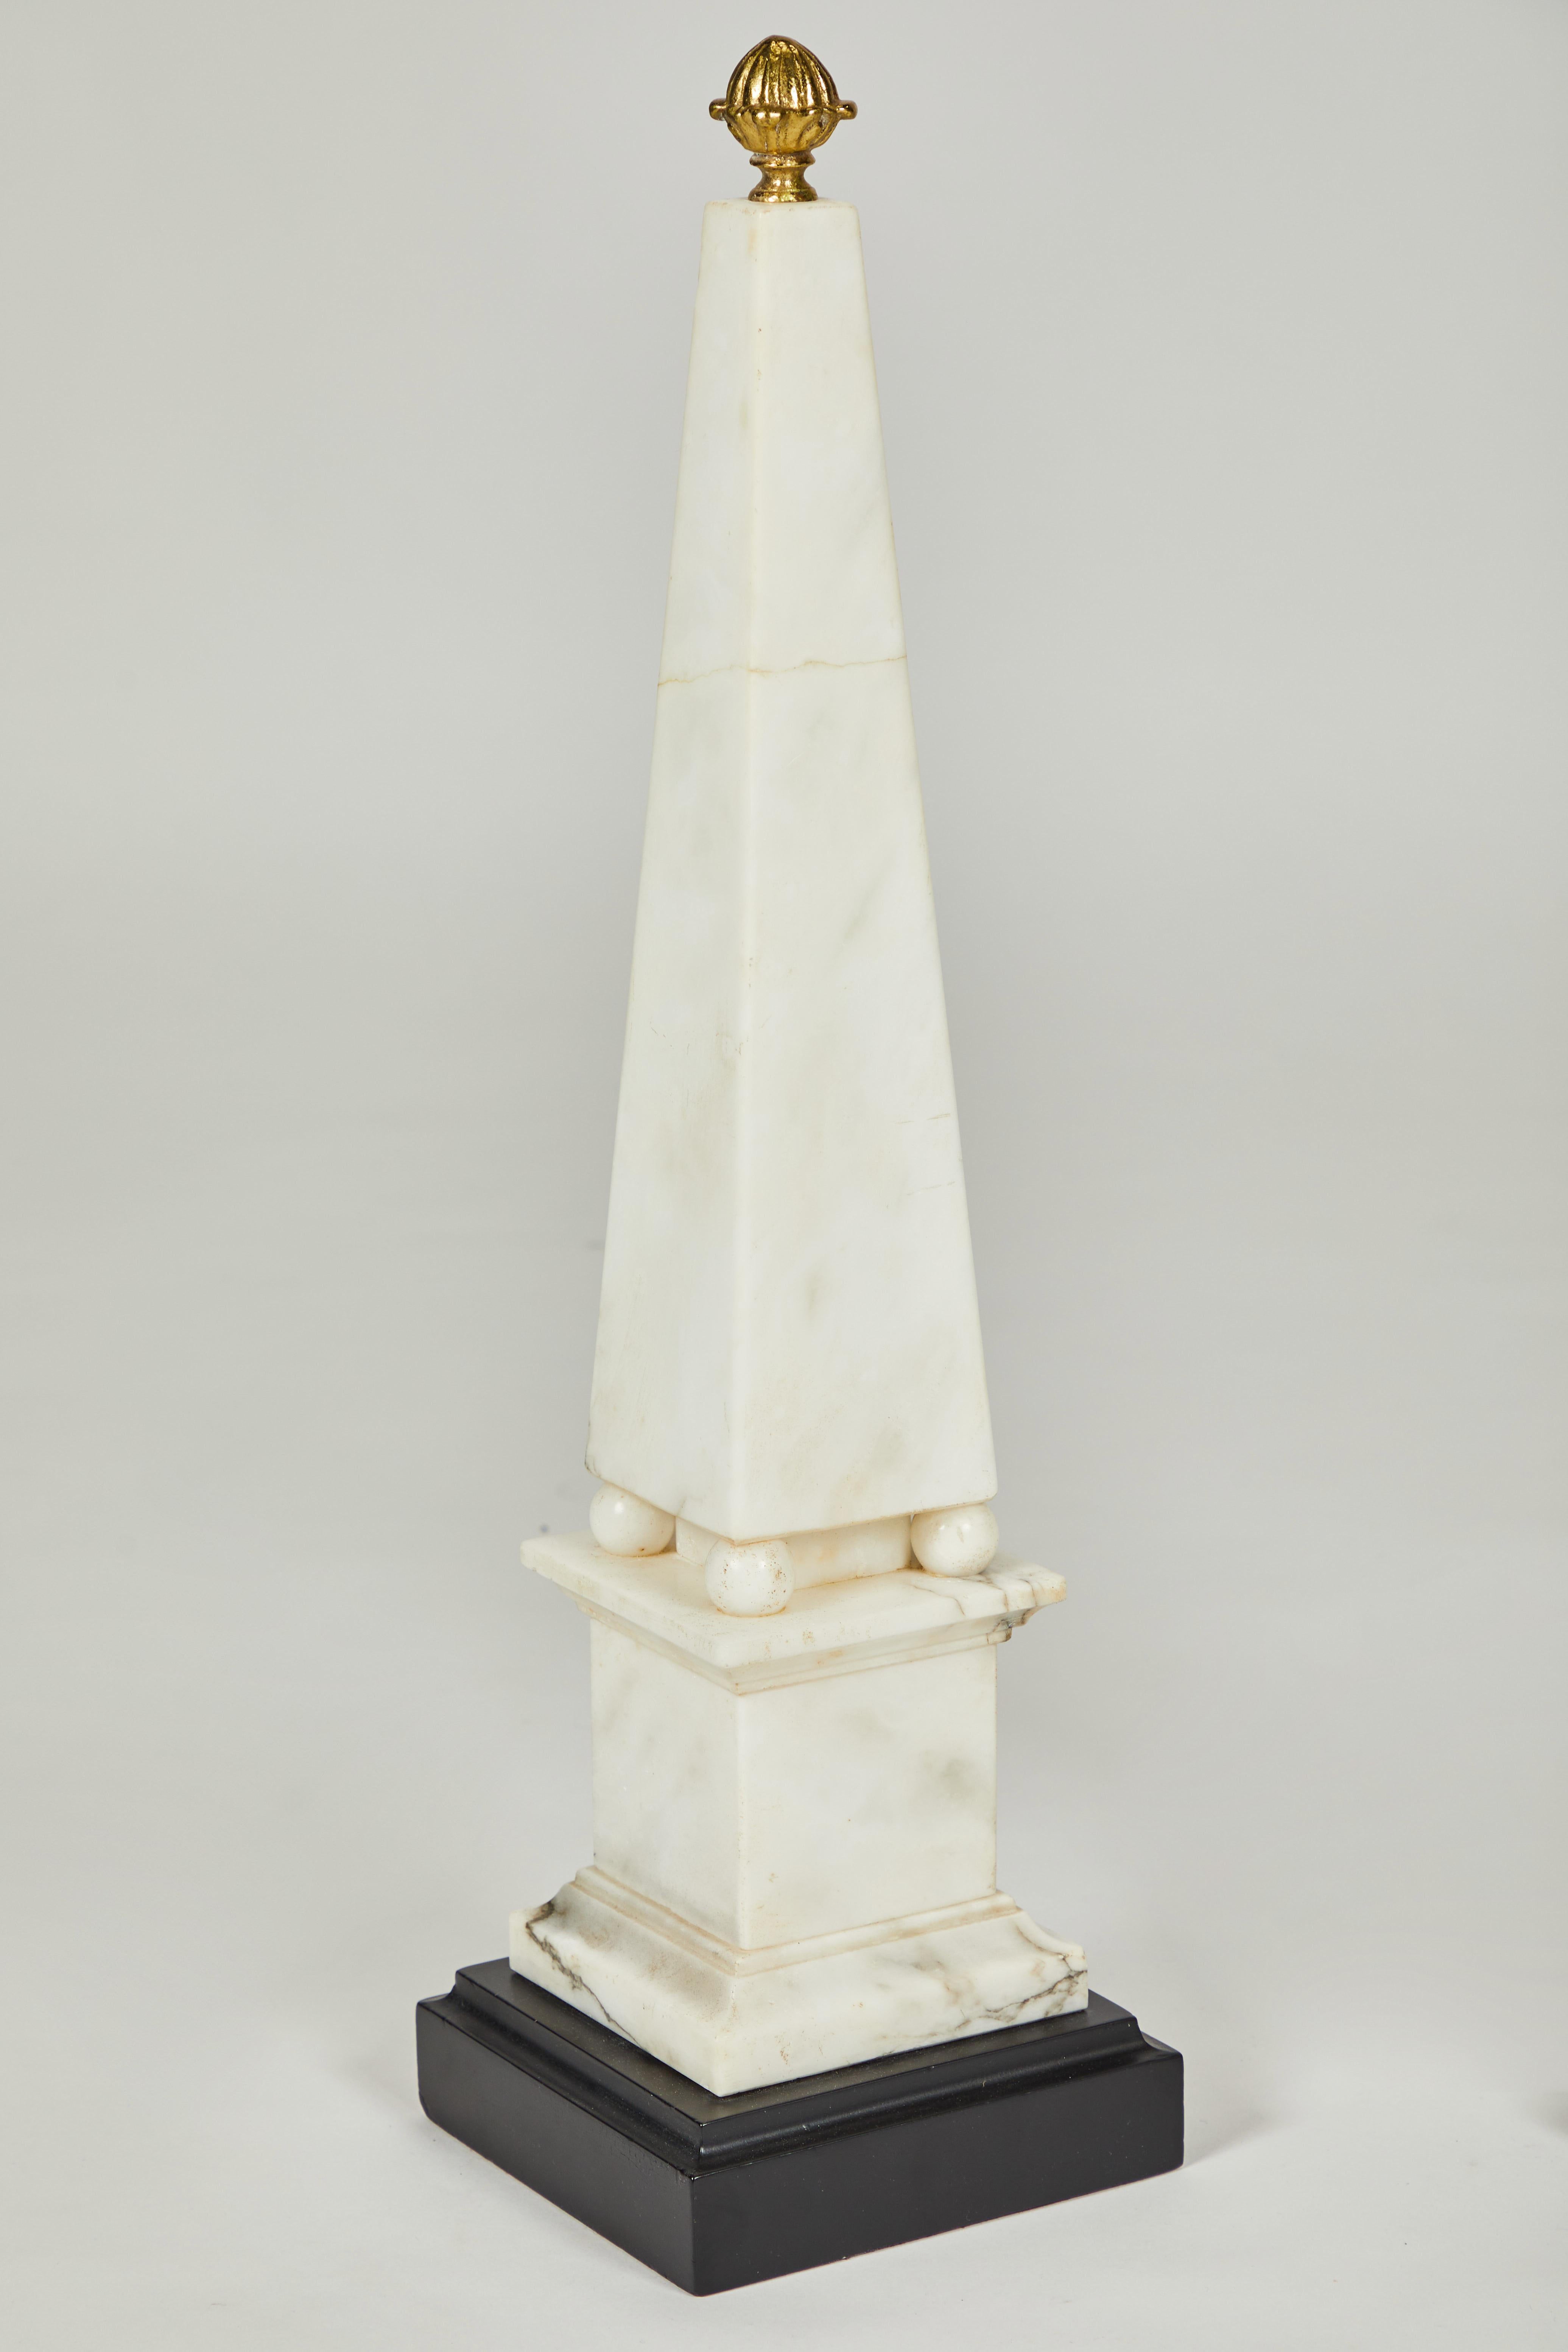 19th Century Pair of White Marble Obelisks on Painted Wood Bases with Brass Acorn Finials For Sale